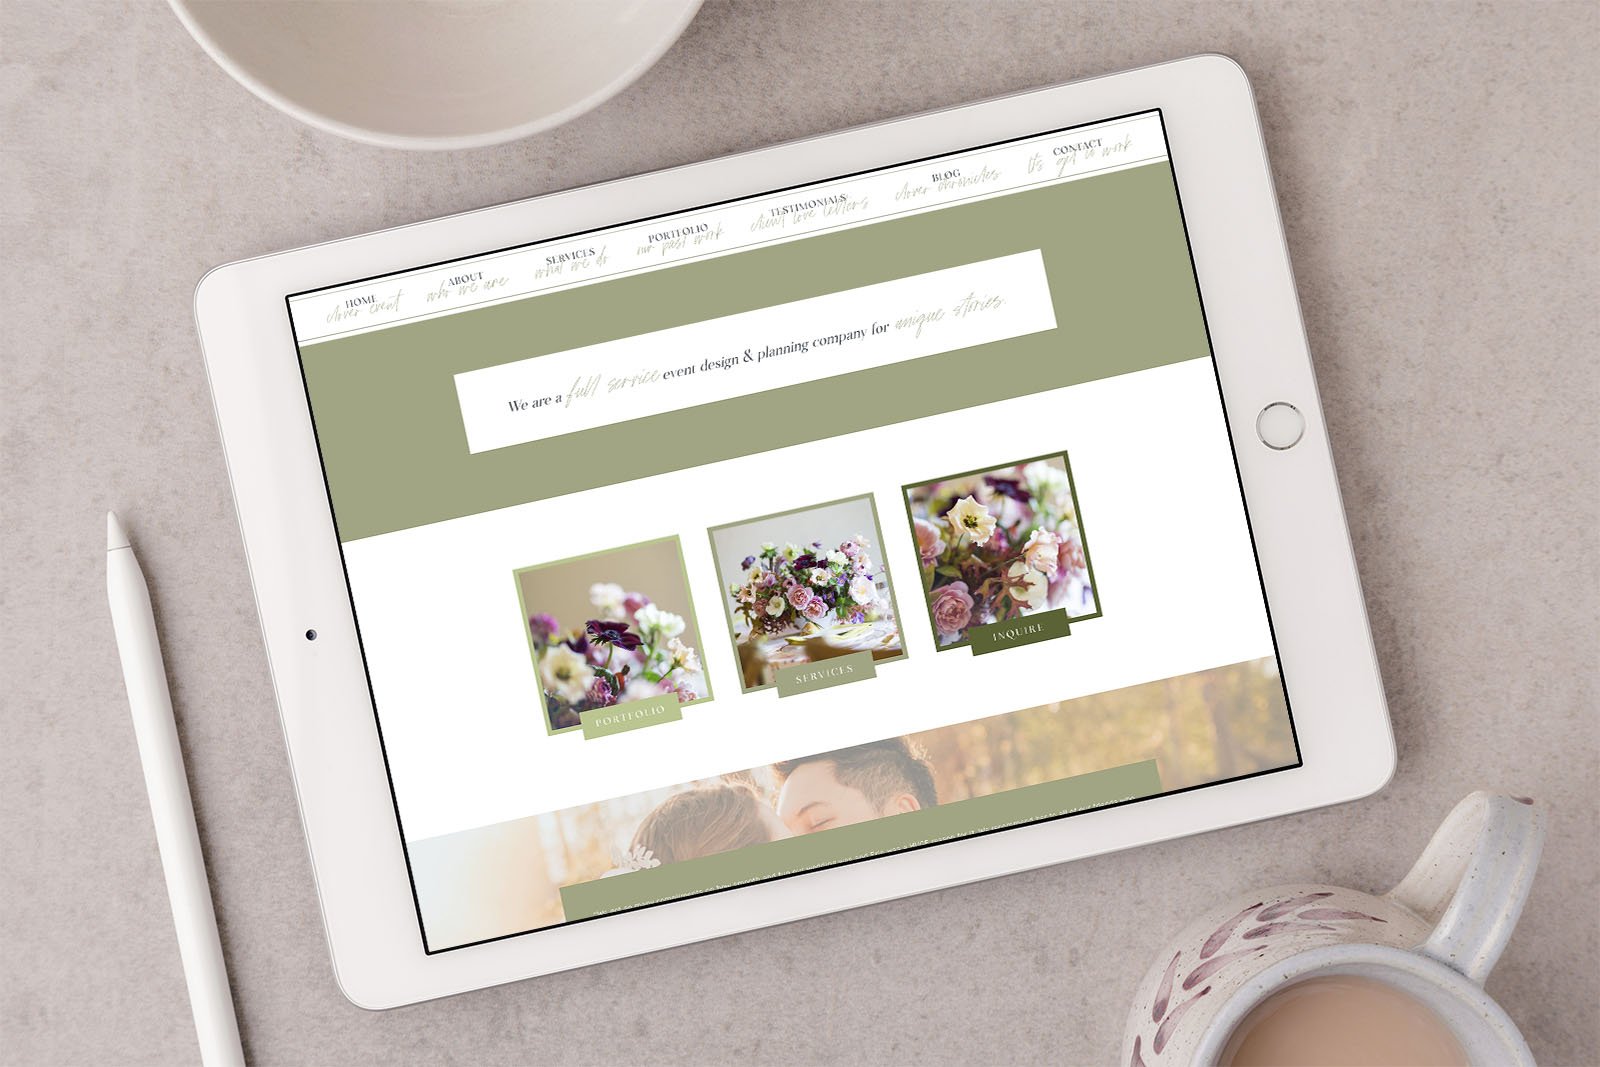 Lenya creative portfolio clover event designs | 4 Mistakes to avoid when designing your own website either from scratch or from a purchased template | Lenya Creative